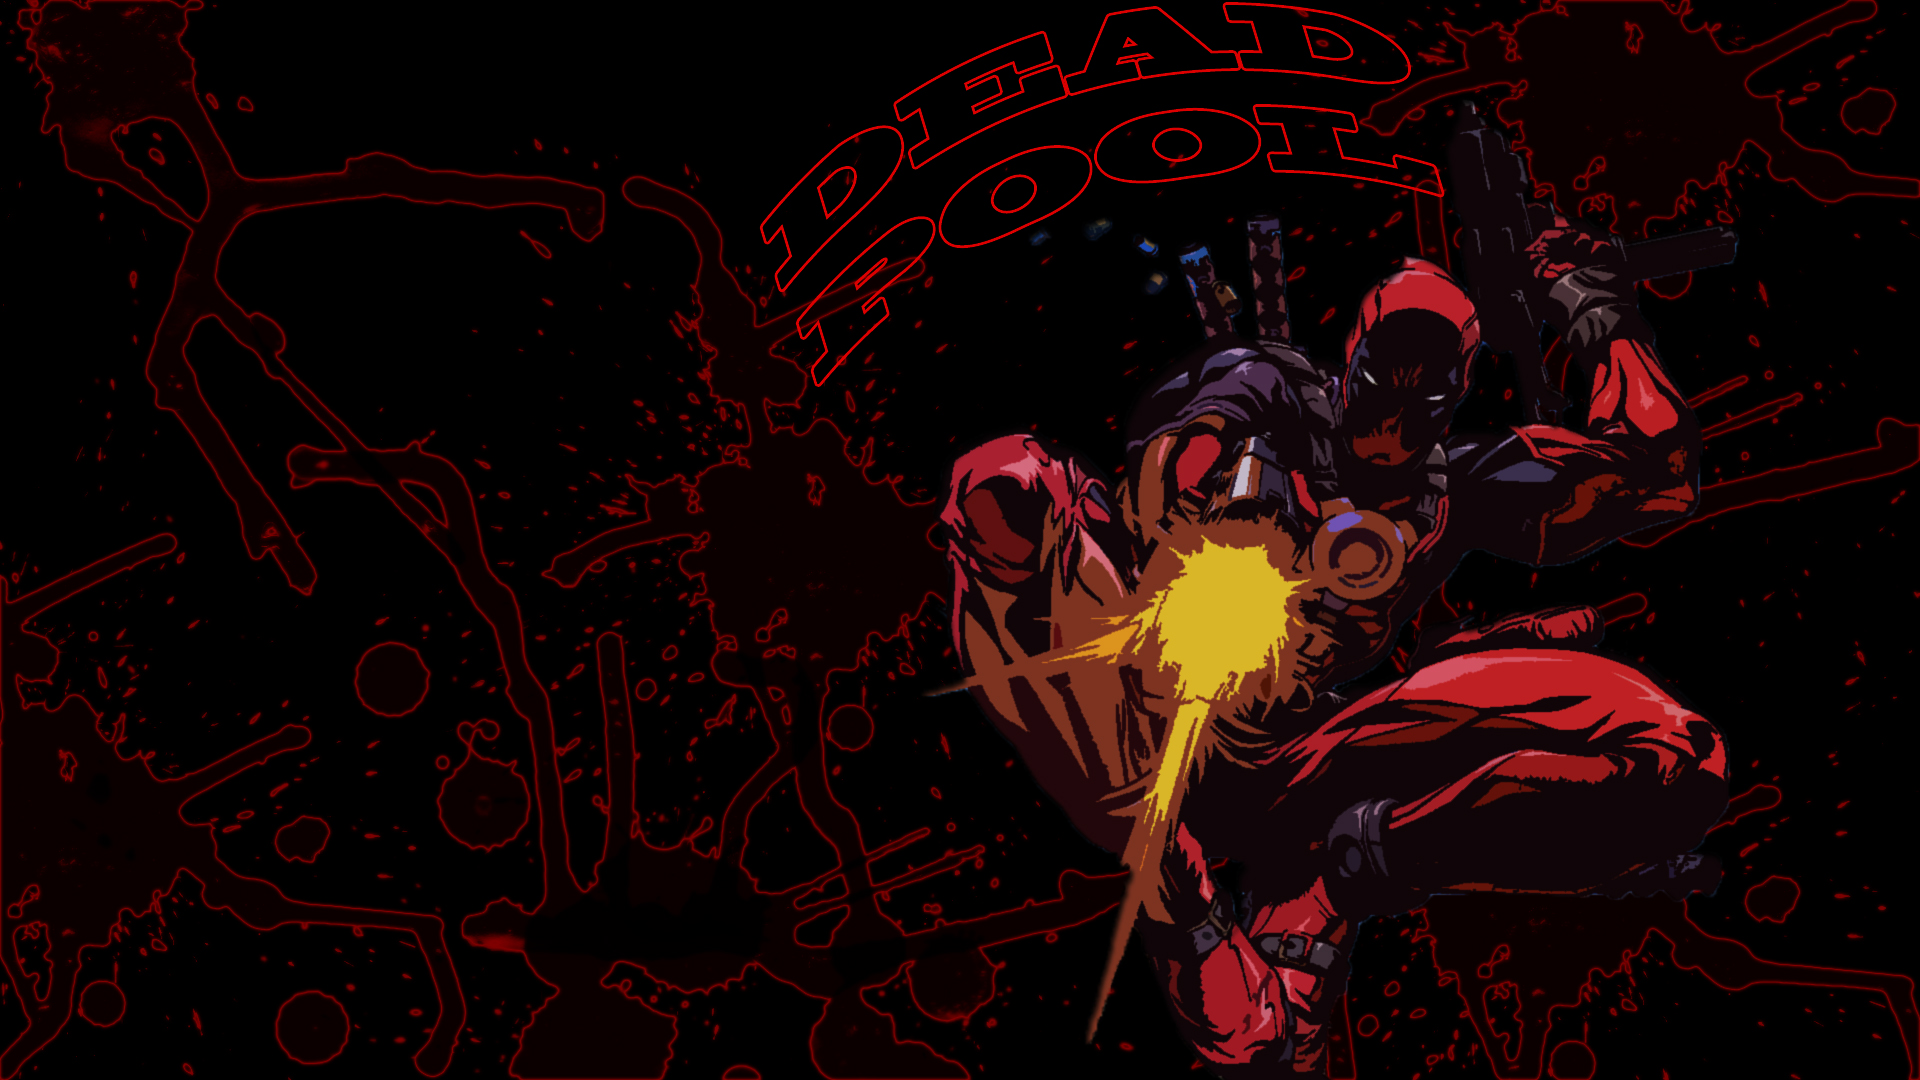 Free Download Wallpapers Cool Oldirrtydoogz Deadpool Whipped Couple Wallpaper 19x1080 For Your Desktop Mobile Tablet Explore 44 Cool Wallpapers Of Deadpool Deadpool Wallpaper For The Computer Deadpool Logo Wallpaper